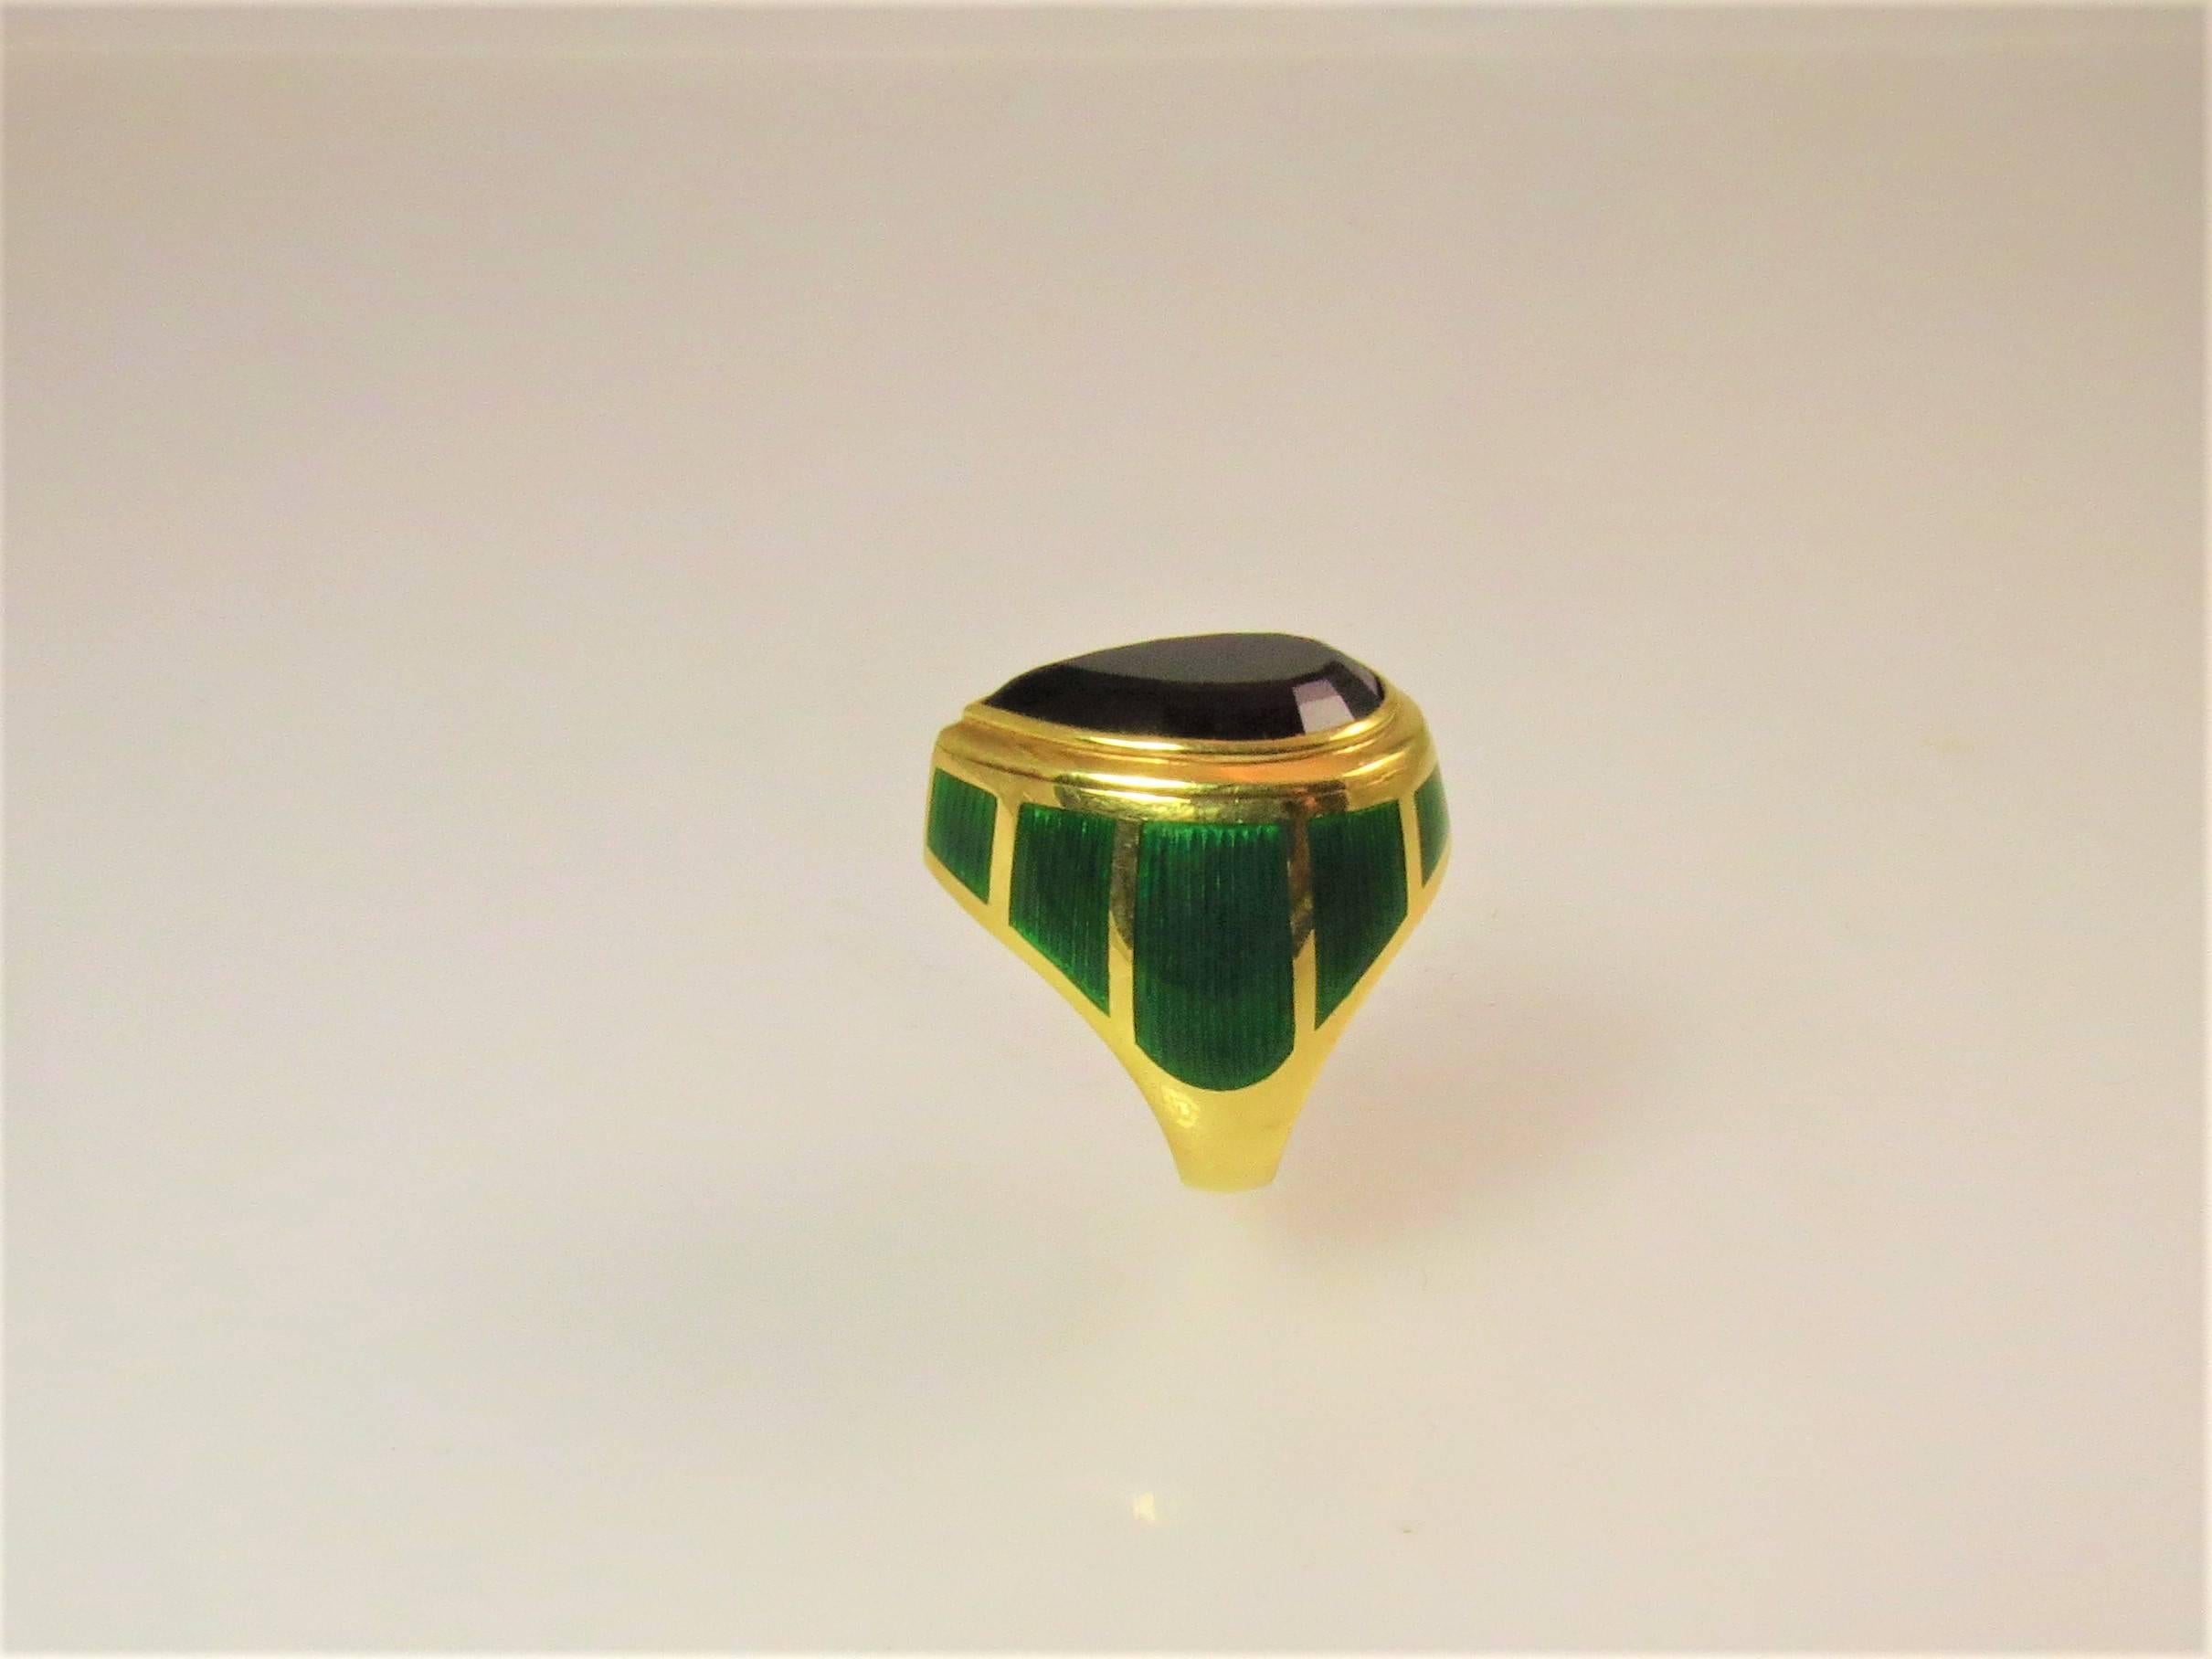 De Vroomen 18K yellow gold and green enamel ring, set with one pear shape   faceted amethyst weighing 10.54cts.
Finger size 7. May be sized.